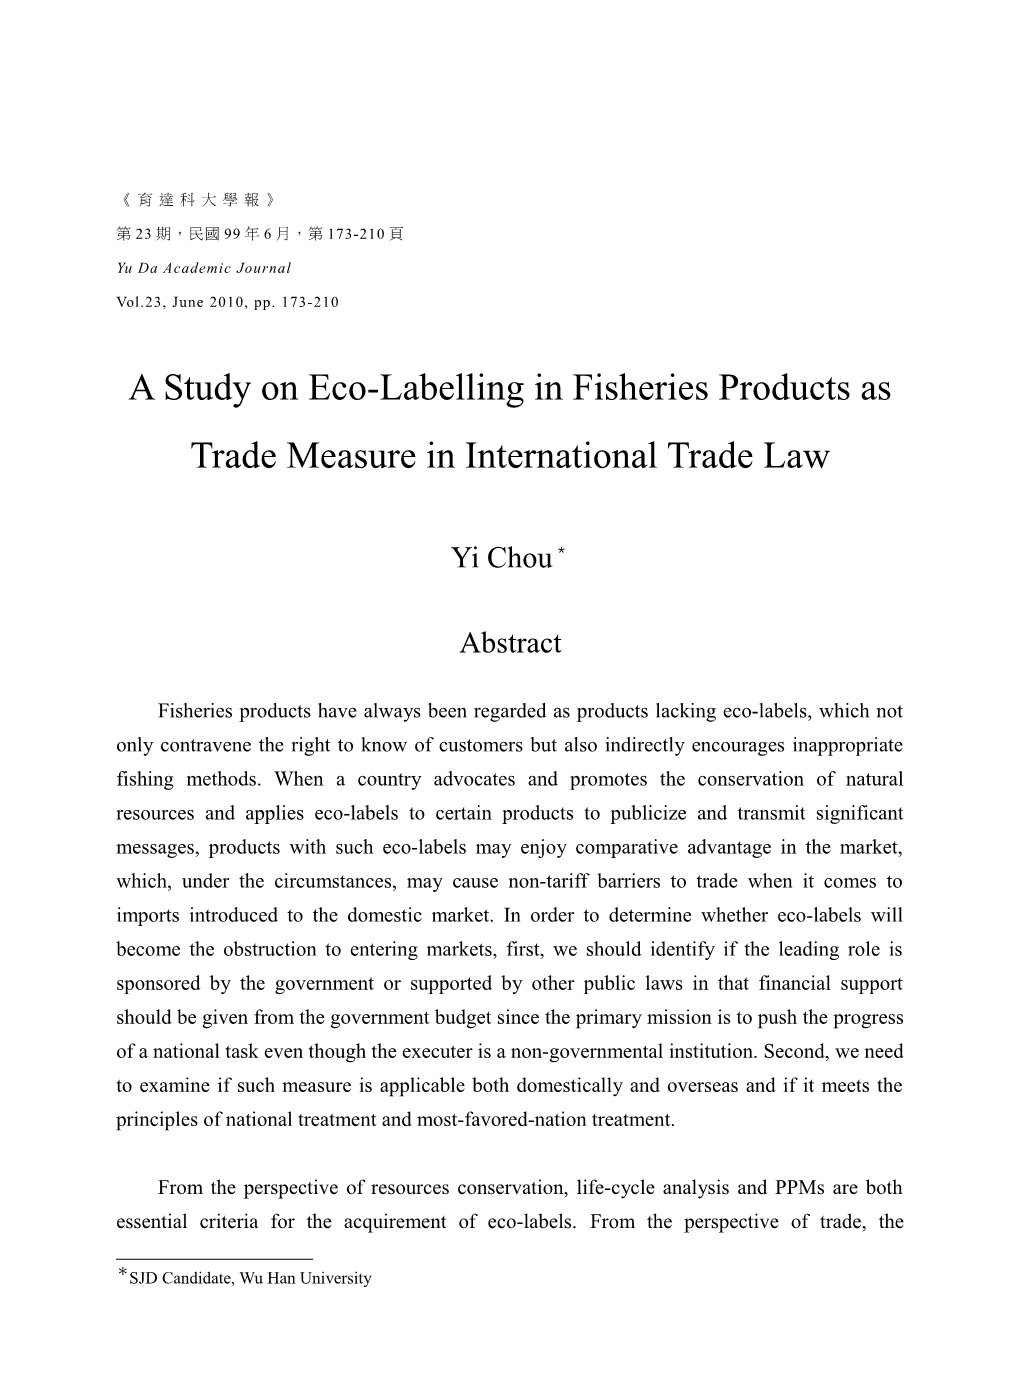 A Study on Eco-Labelling As the Trade Measure to Protect Fisheries Resource